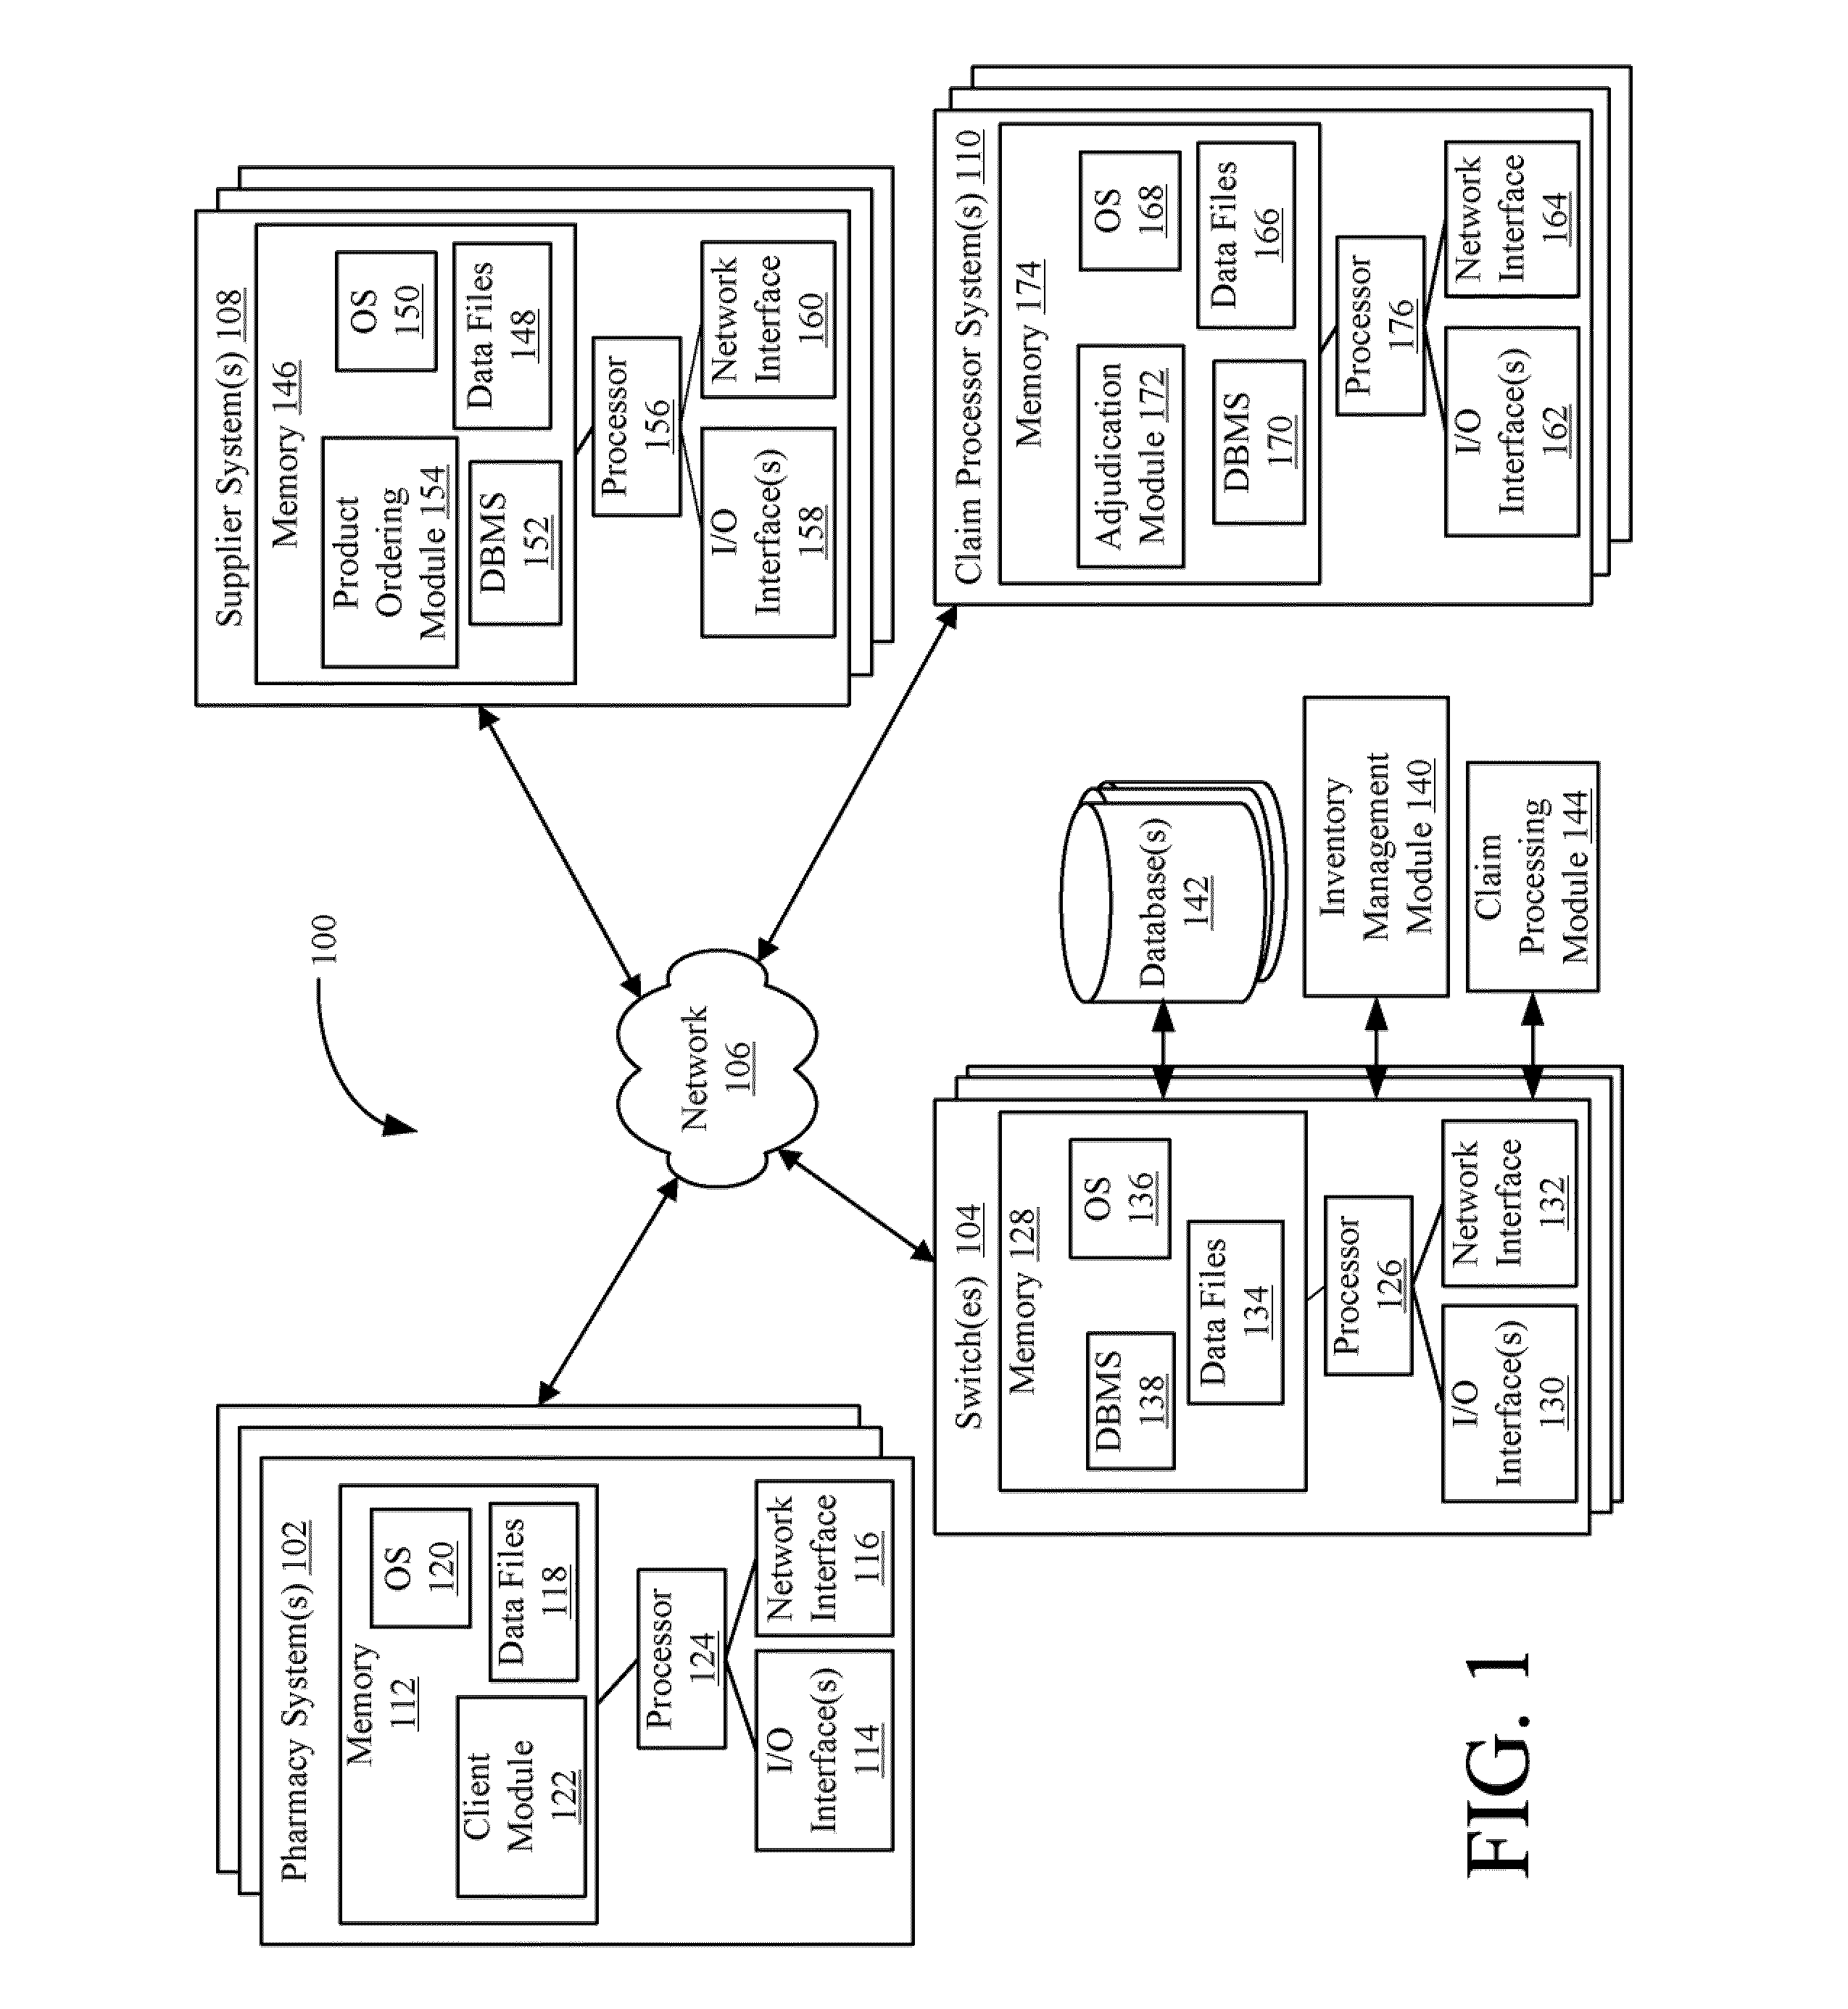 Systems and methods for pharmacy inventory management